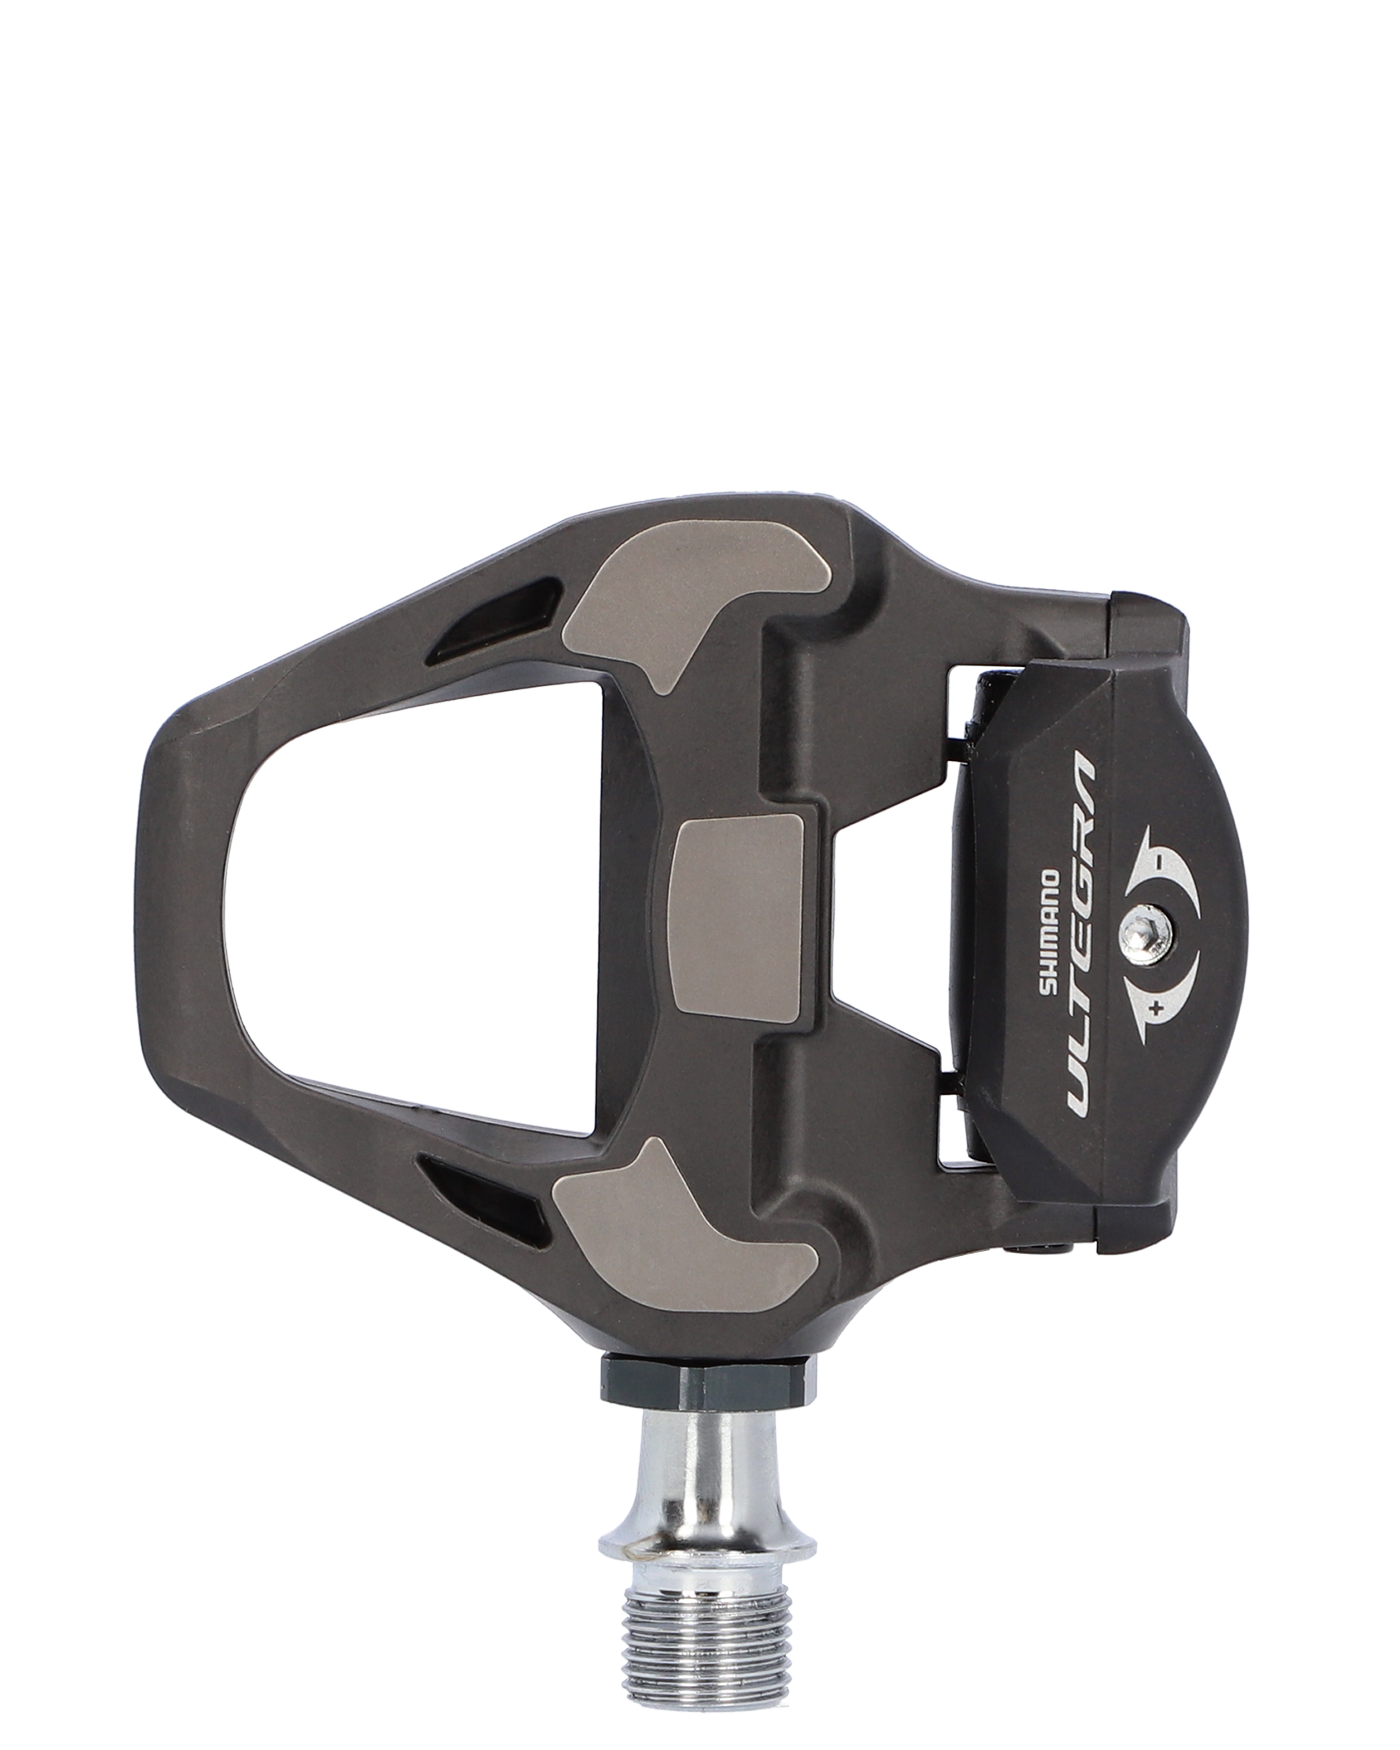 Shimano PD-R8000 Ultegra SPD-SL Pedals | CANYON US